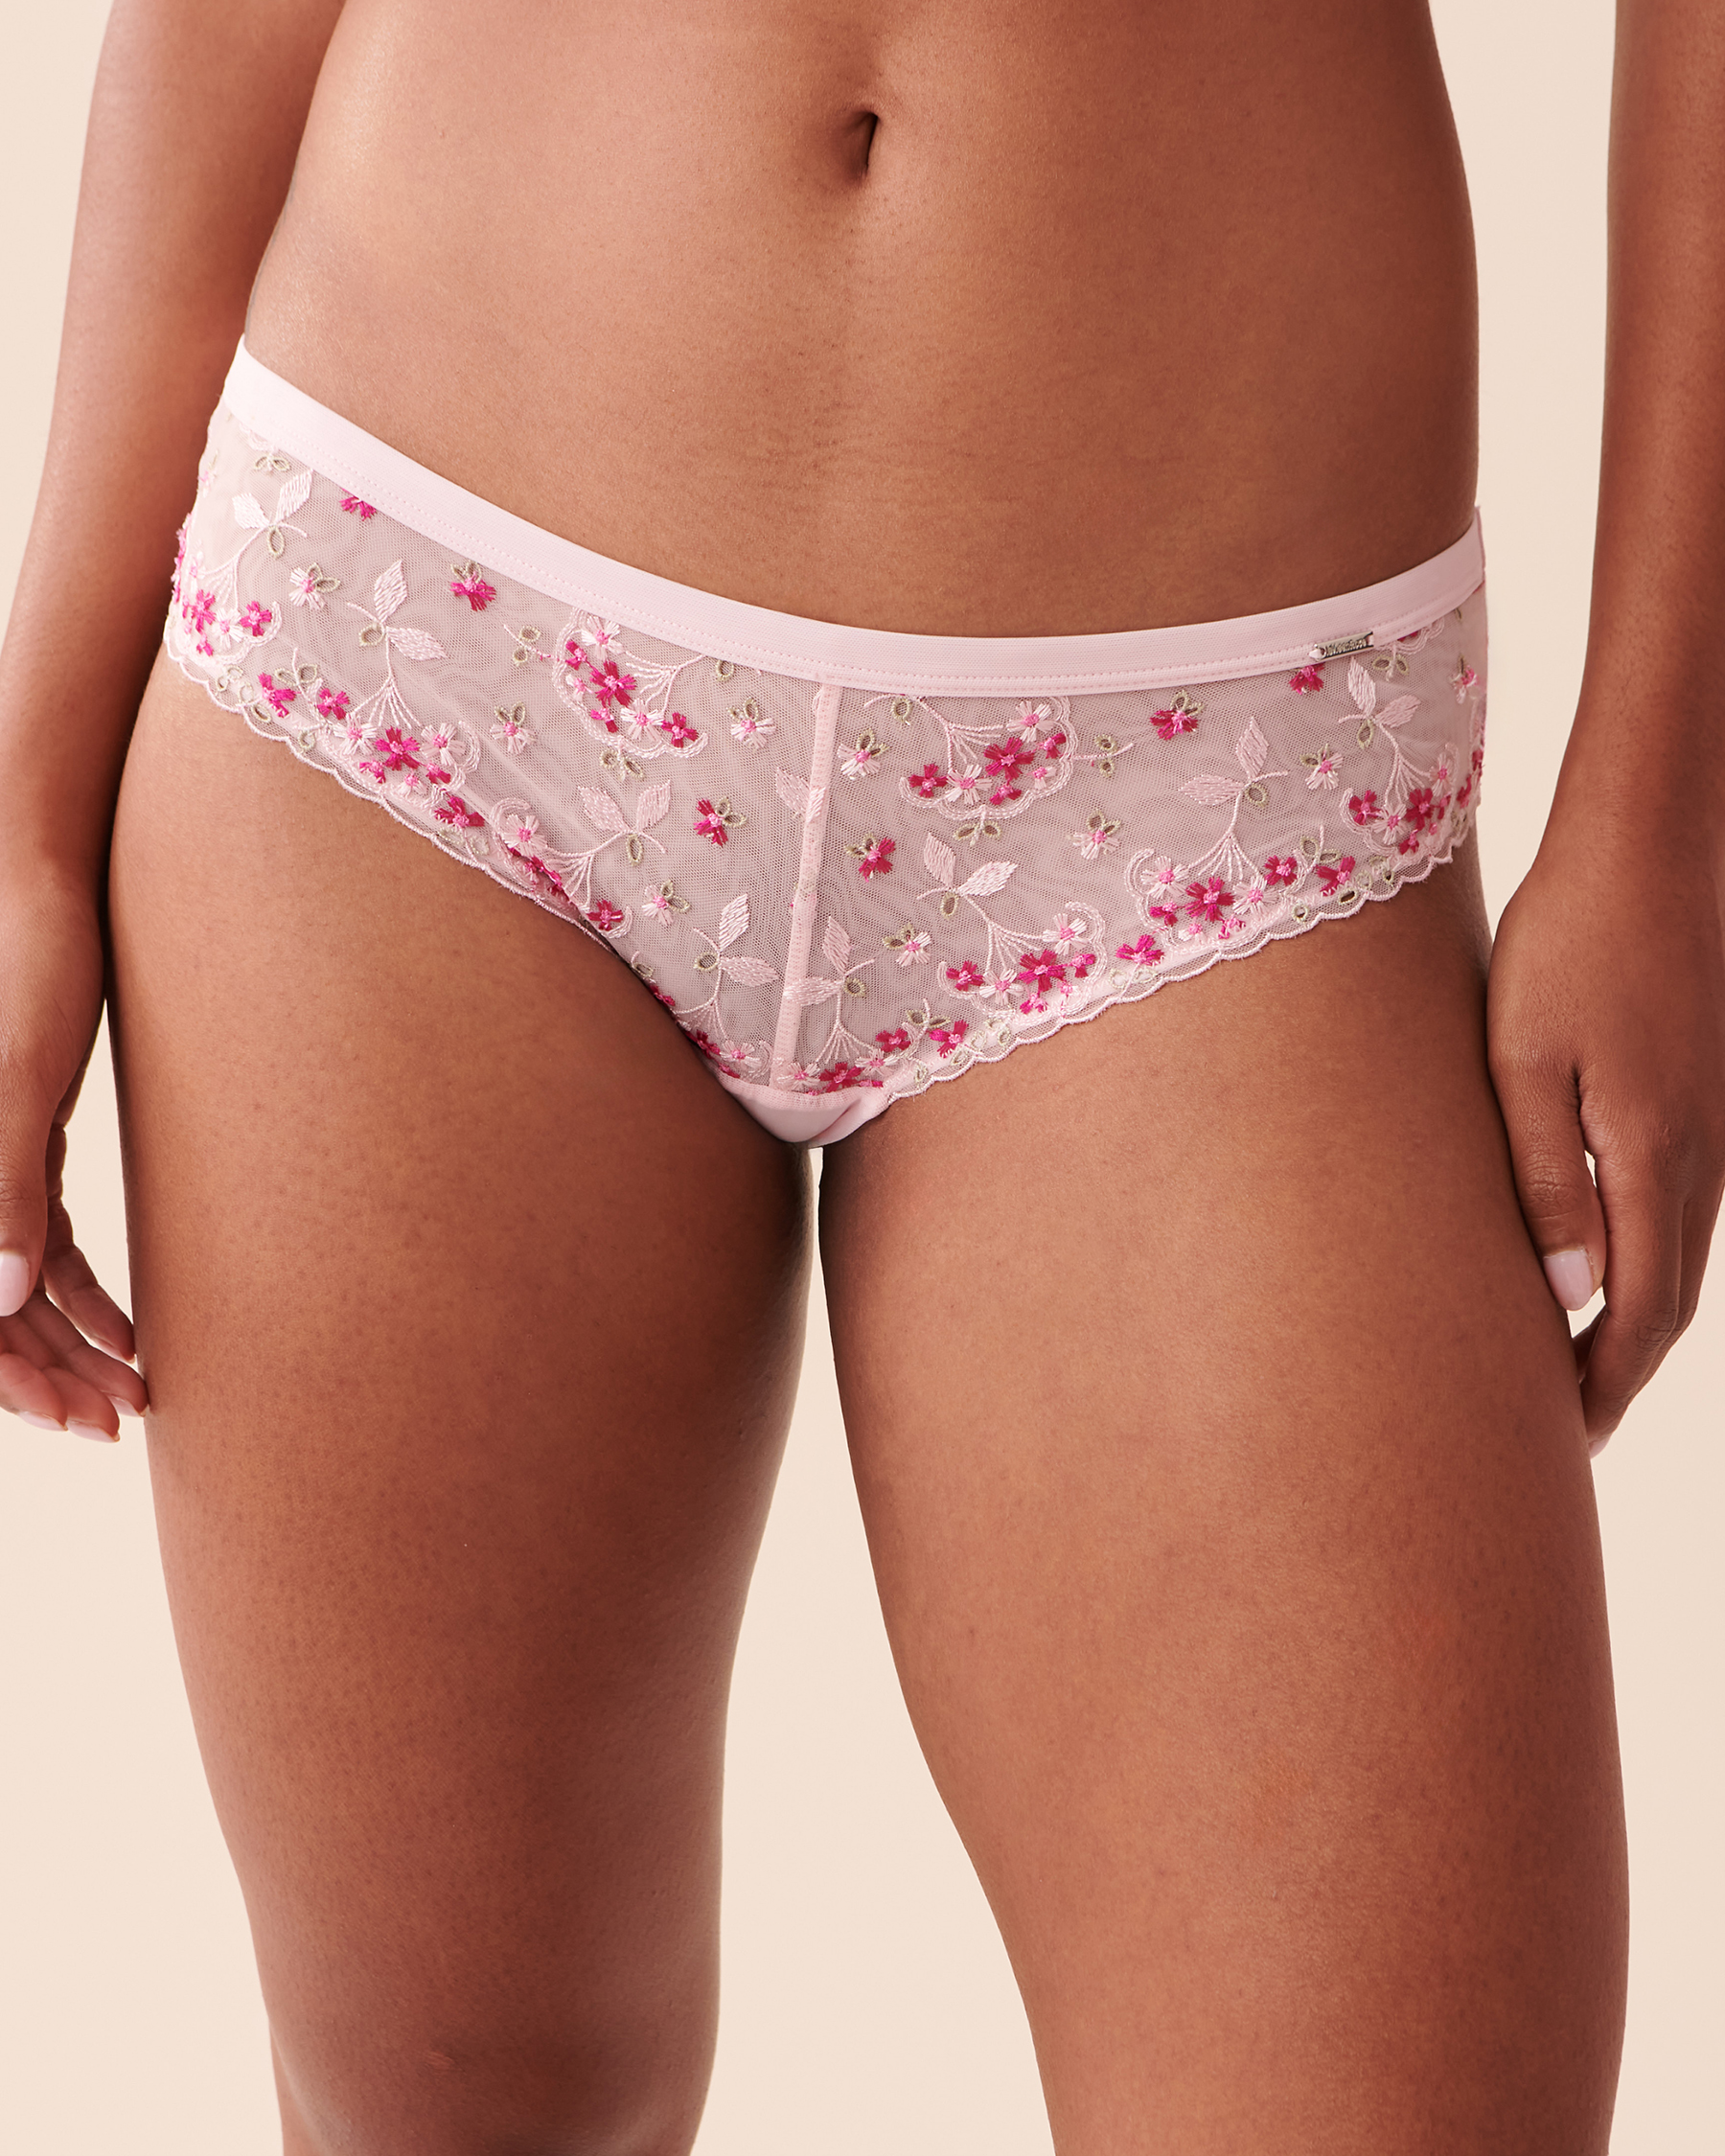 LA VIE EN ROSE Embroidered Mesh Cheeky Panty Pink Floral Embroidery 20300279 - View4